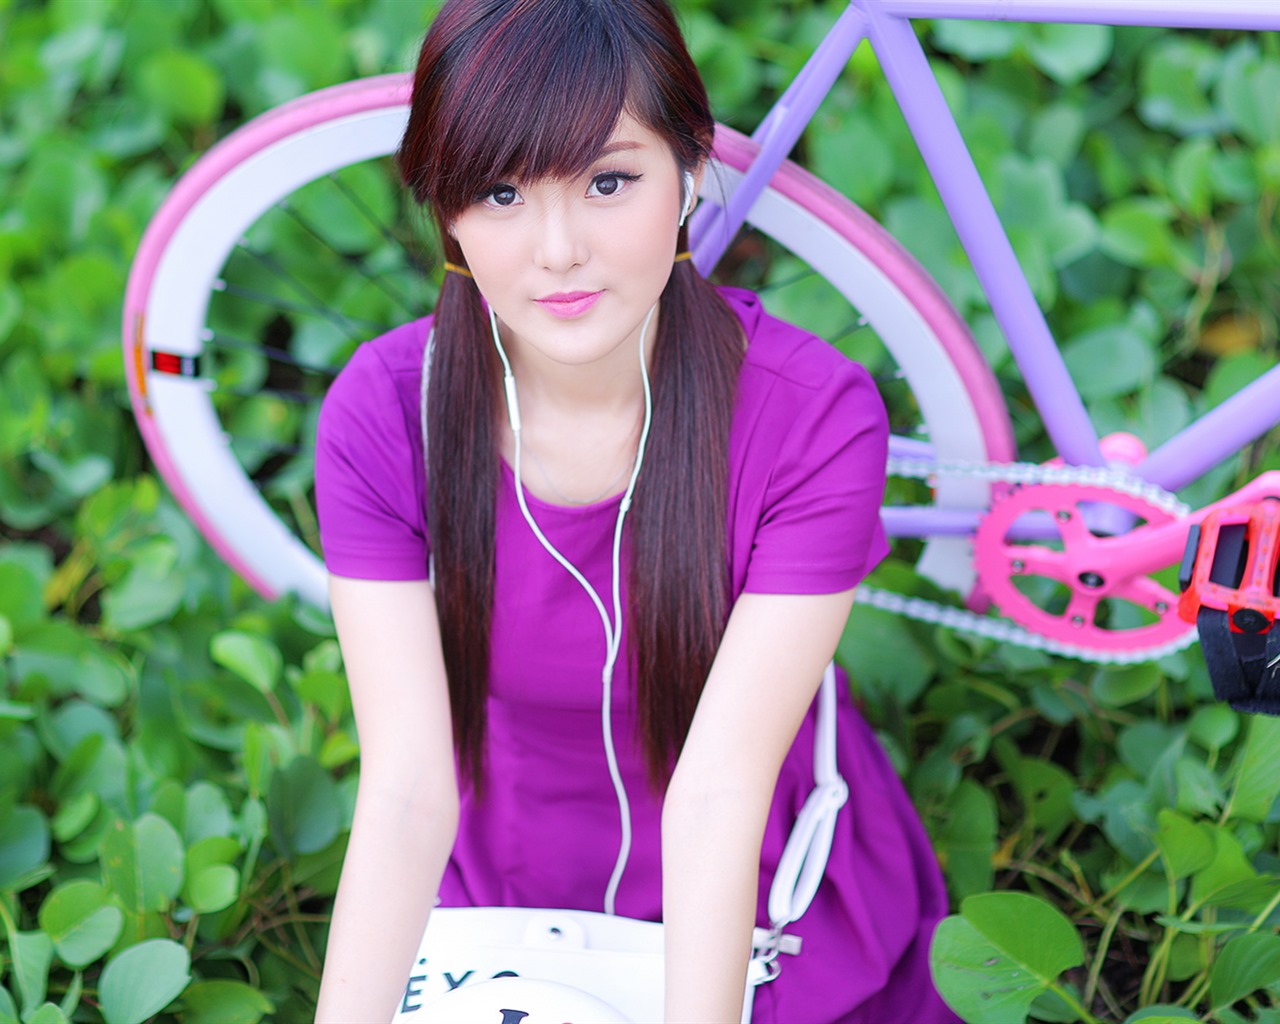 Pure and lovely young Asian girl HD wallpapers collection (5) #34 - 1280x1024